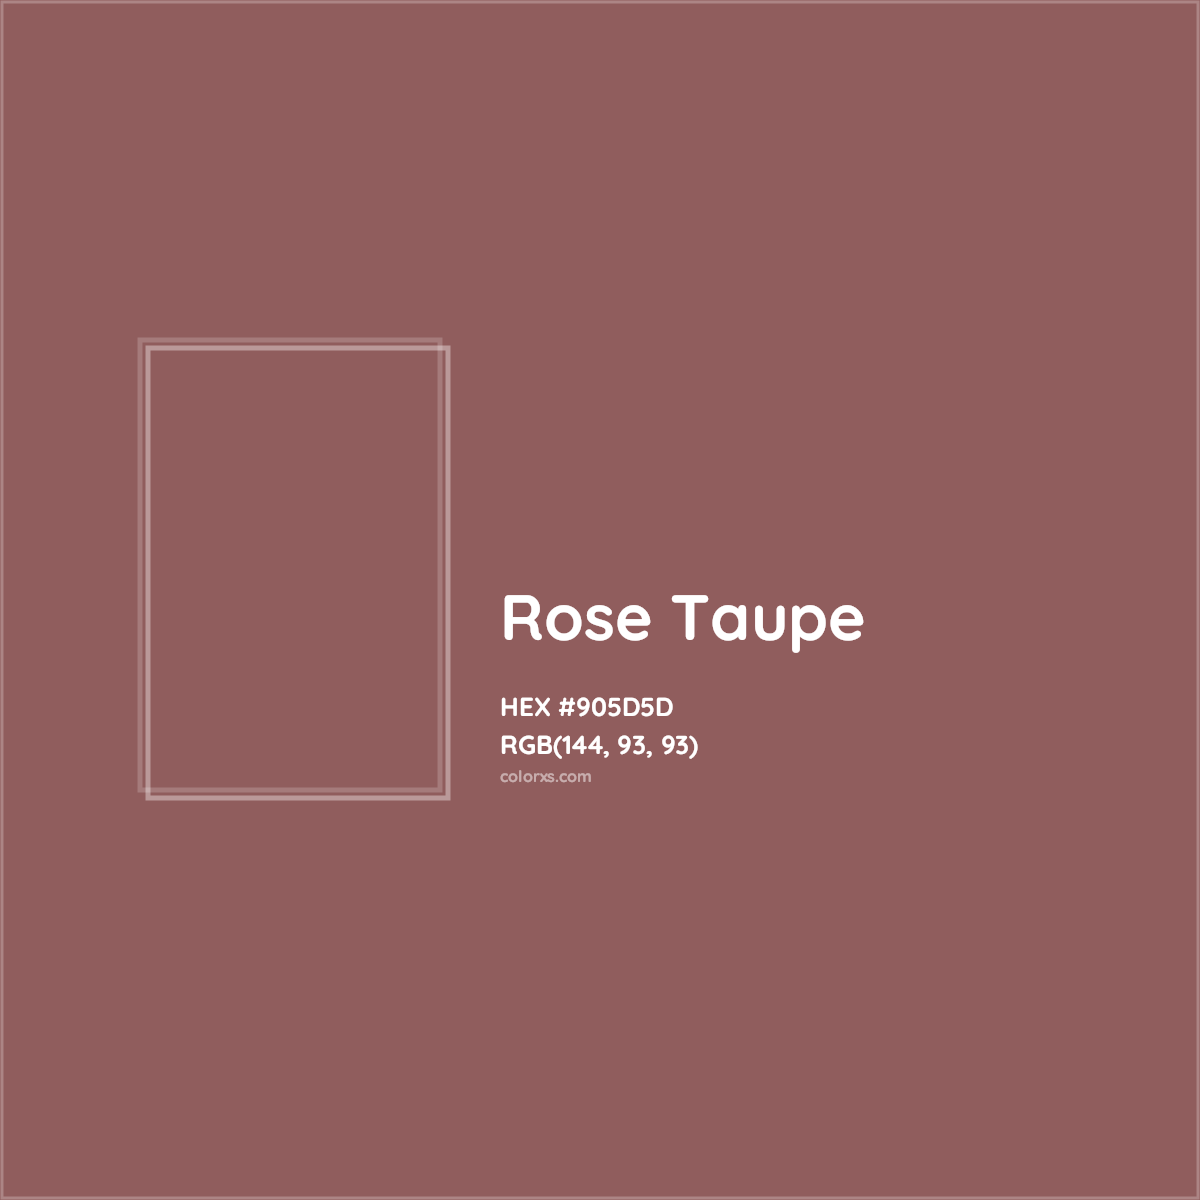 HEX #905D5D Rose Taupe Color - Color Code